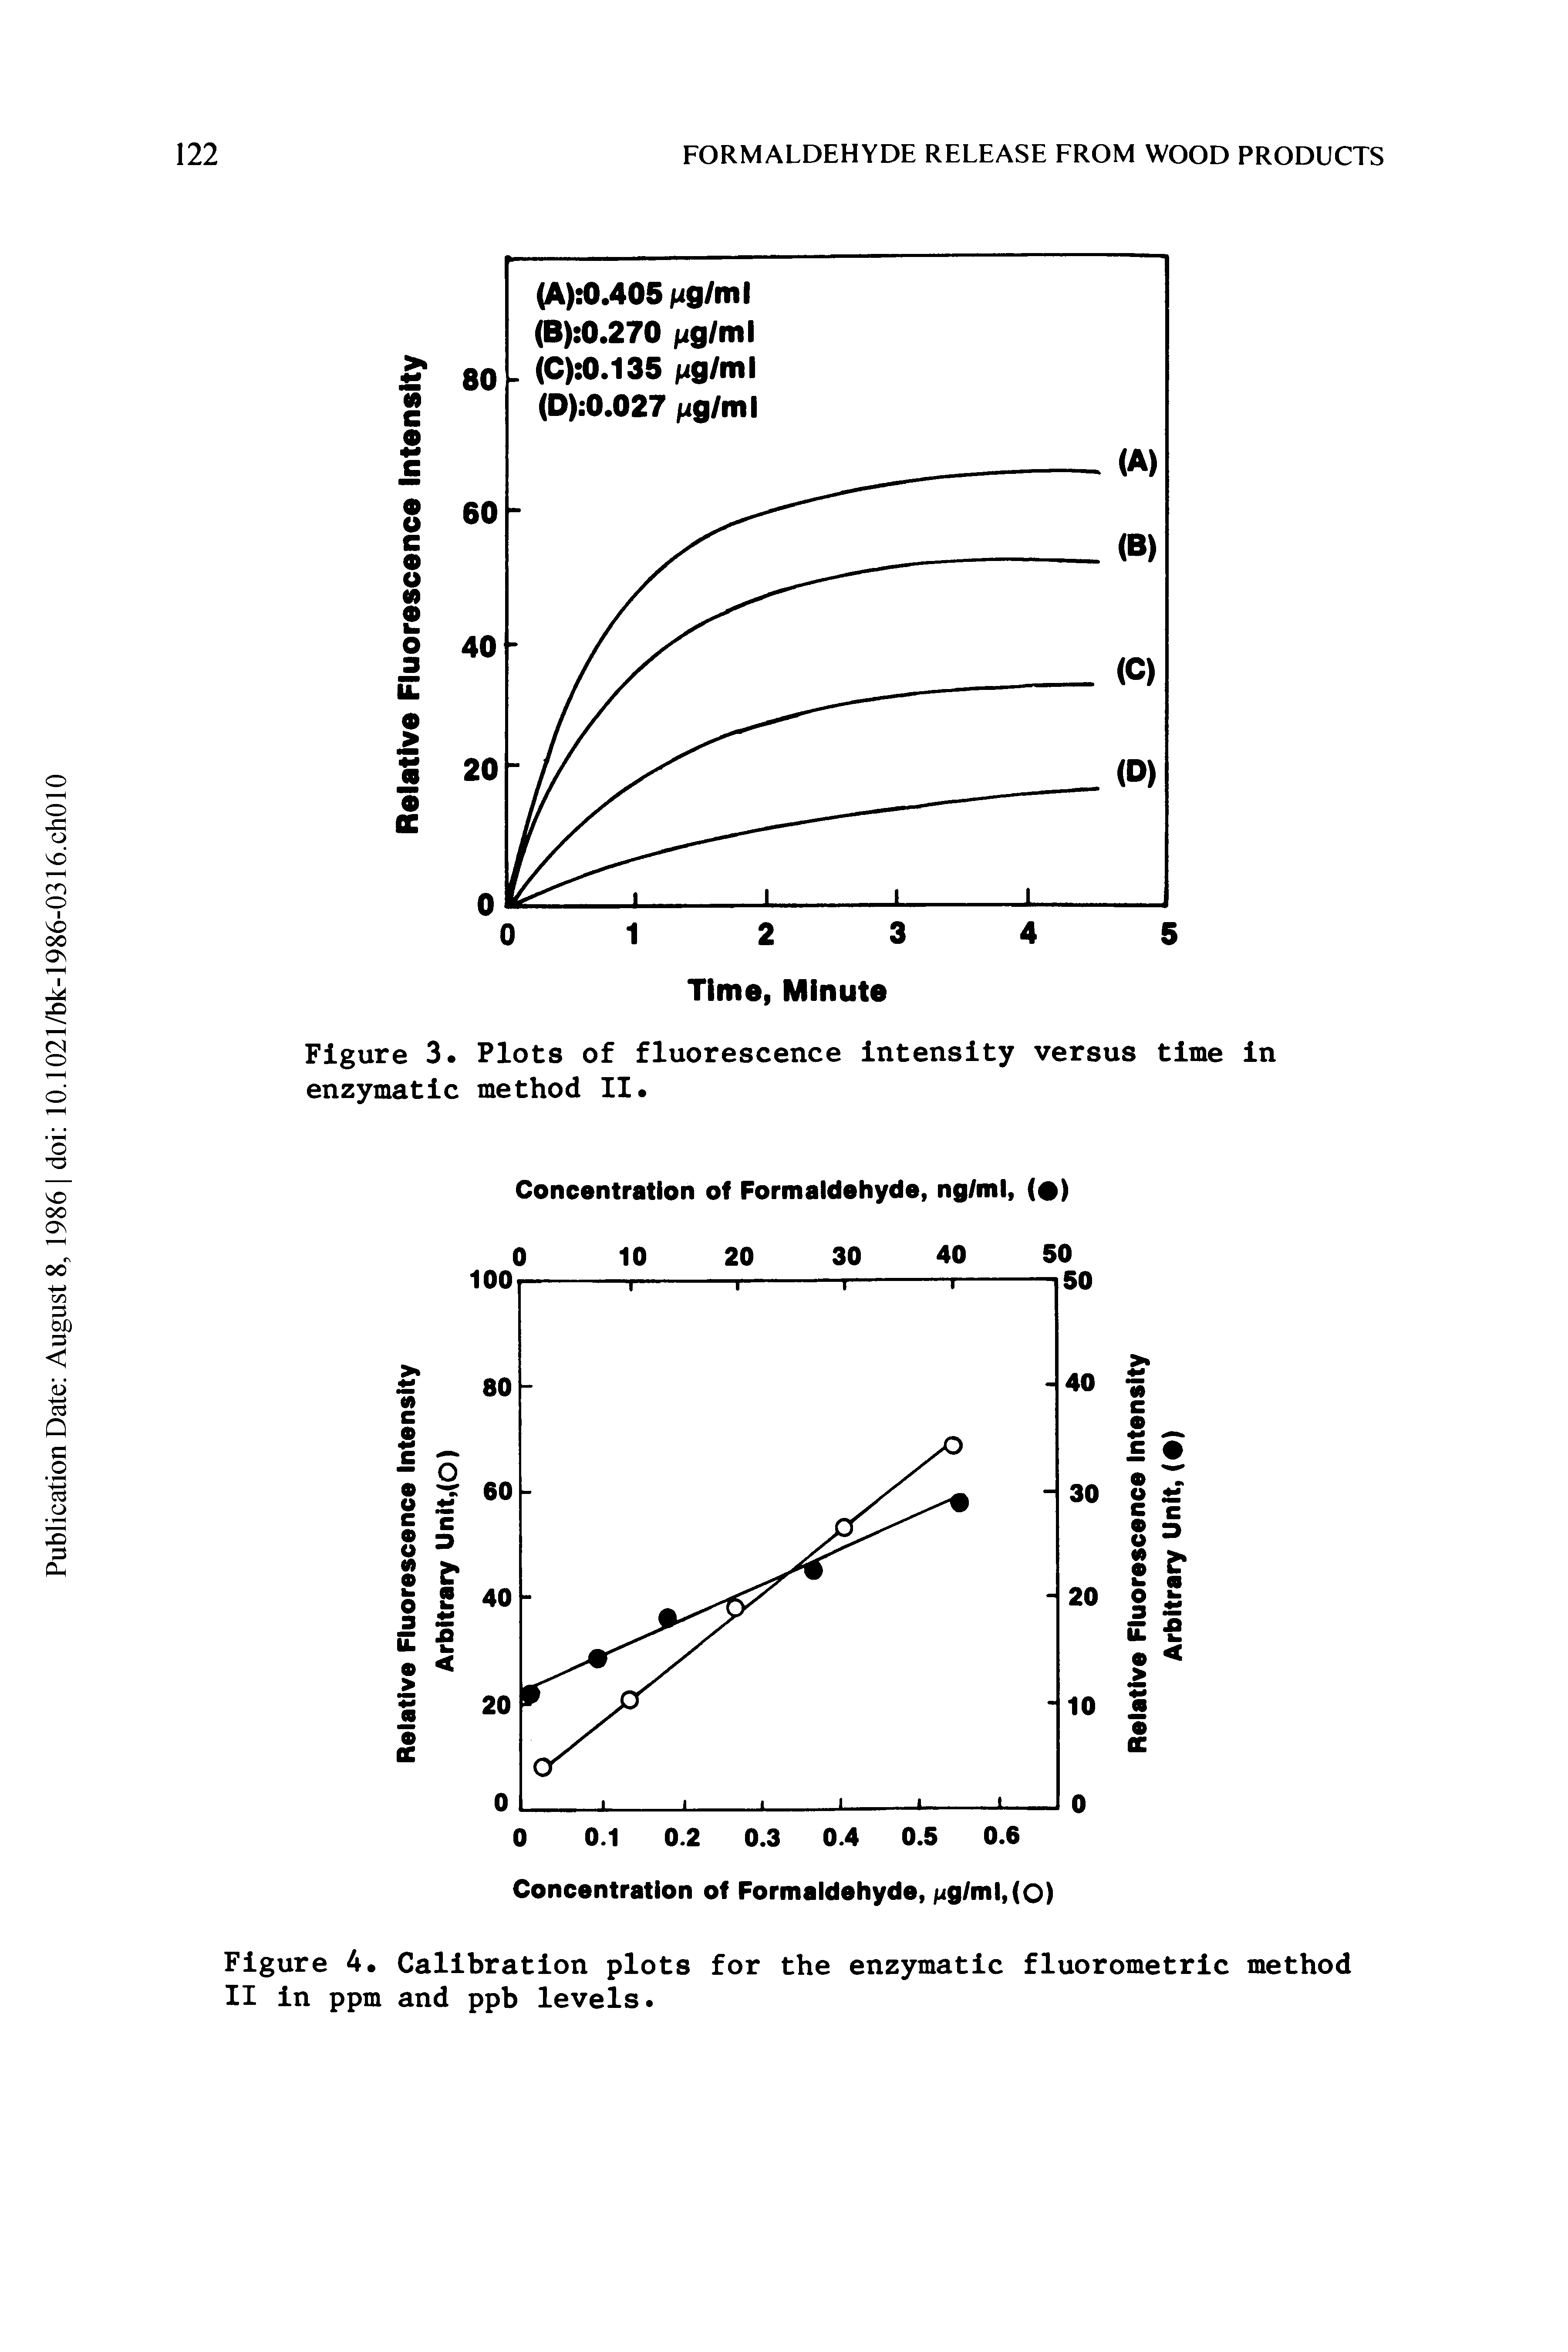 Figure 4. Calibration plots for the enzymatic fluorometric method II in ppm and ppb levels.